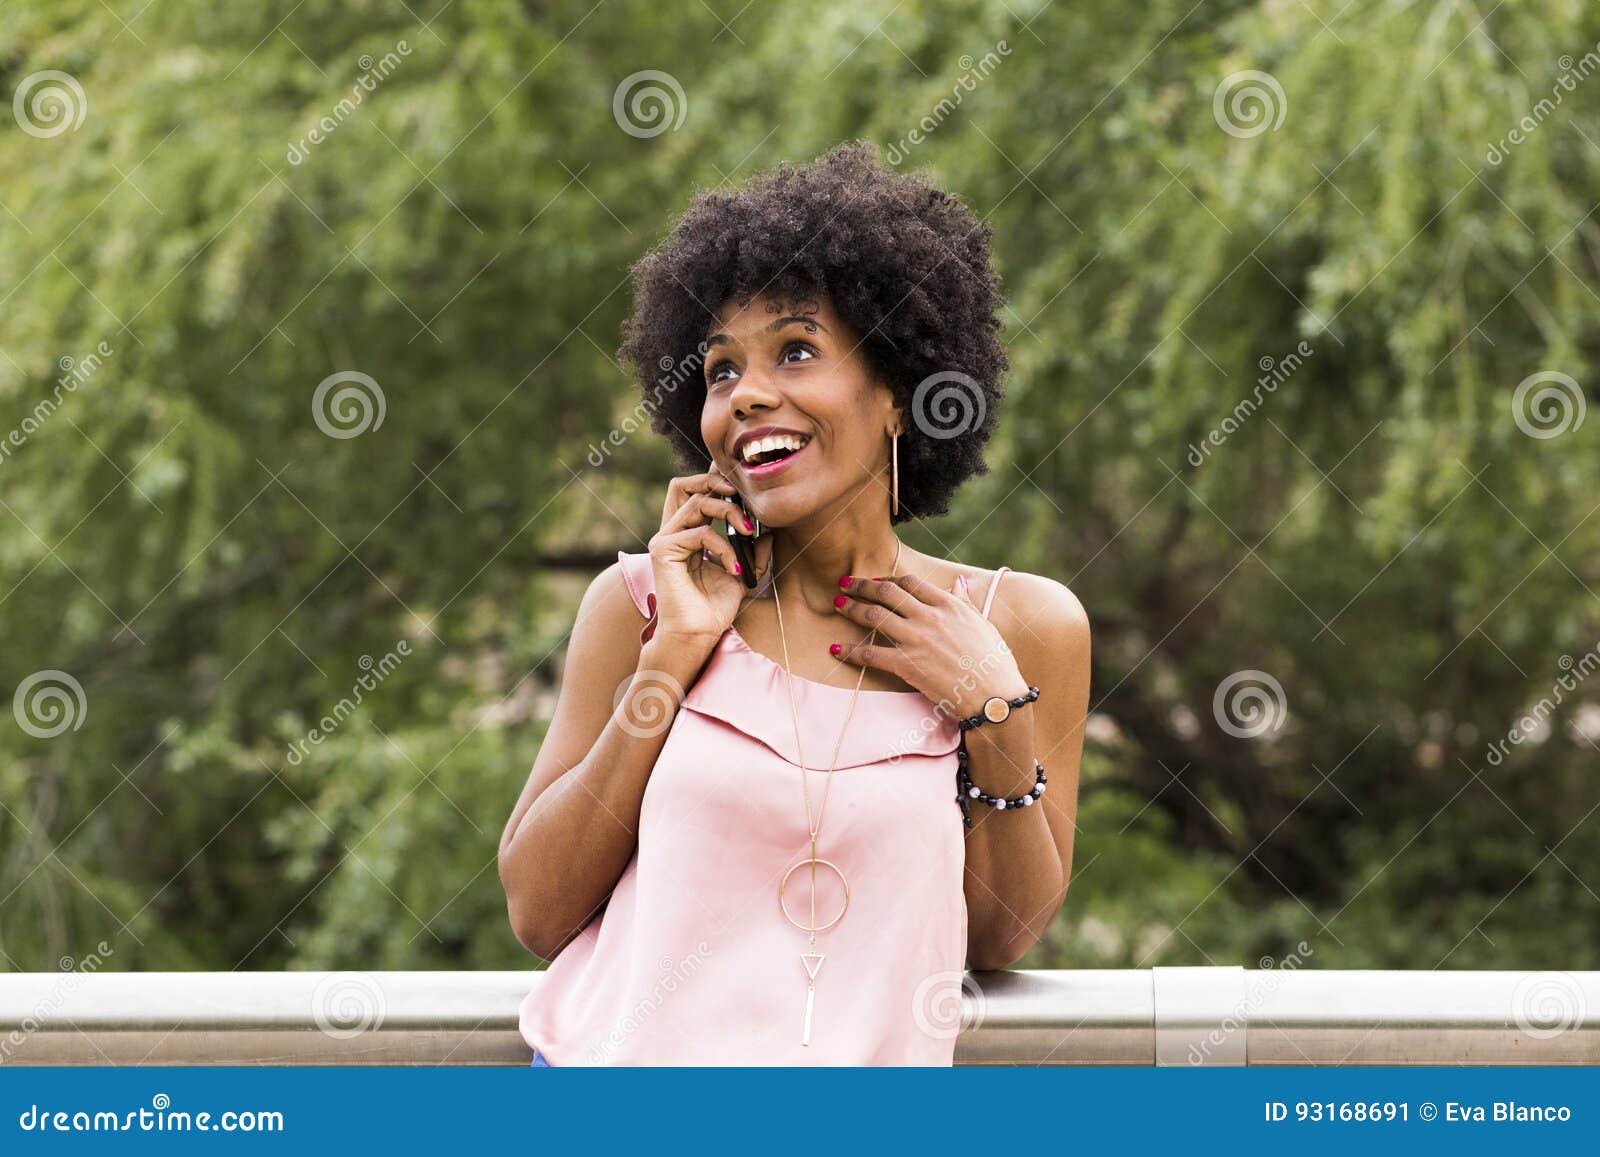 Portrait Of A Happy Young Beautiful Afro American Woman Smiling Stock